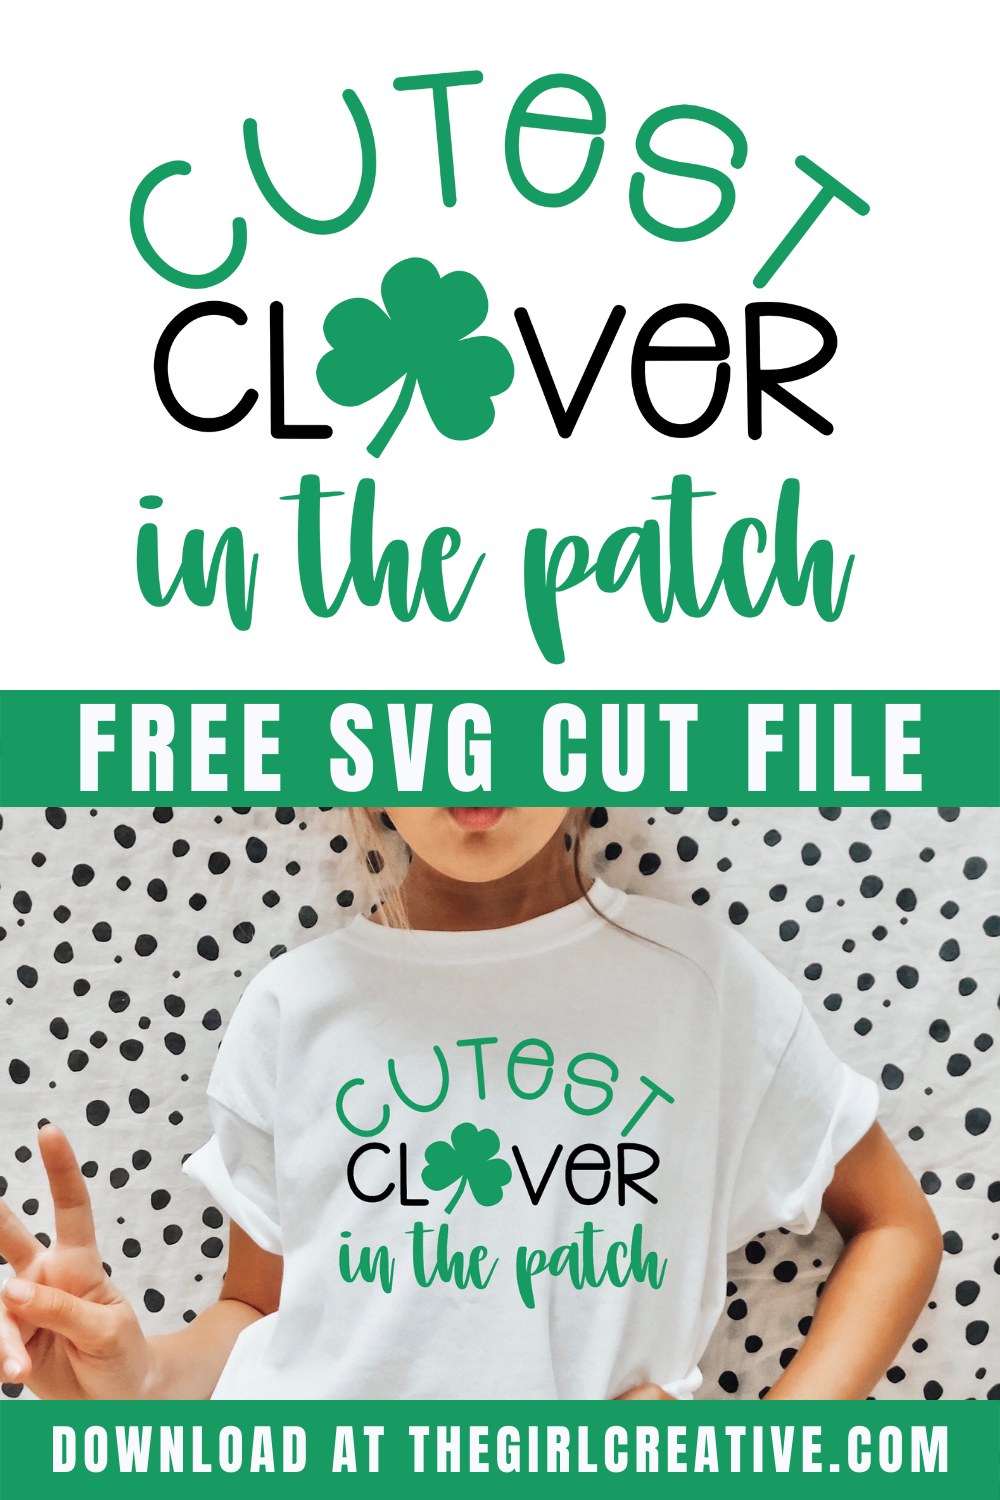 Cutest Clover in the Patch shirt